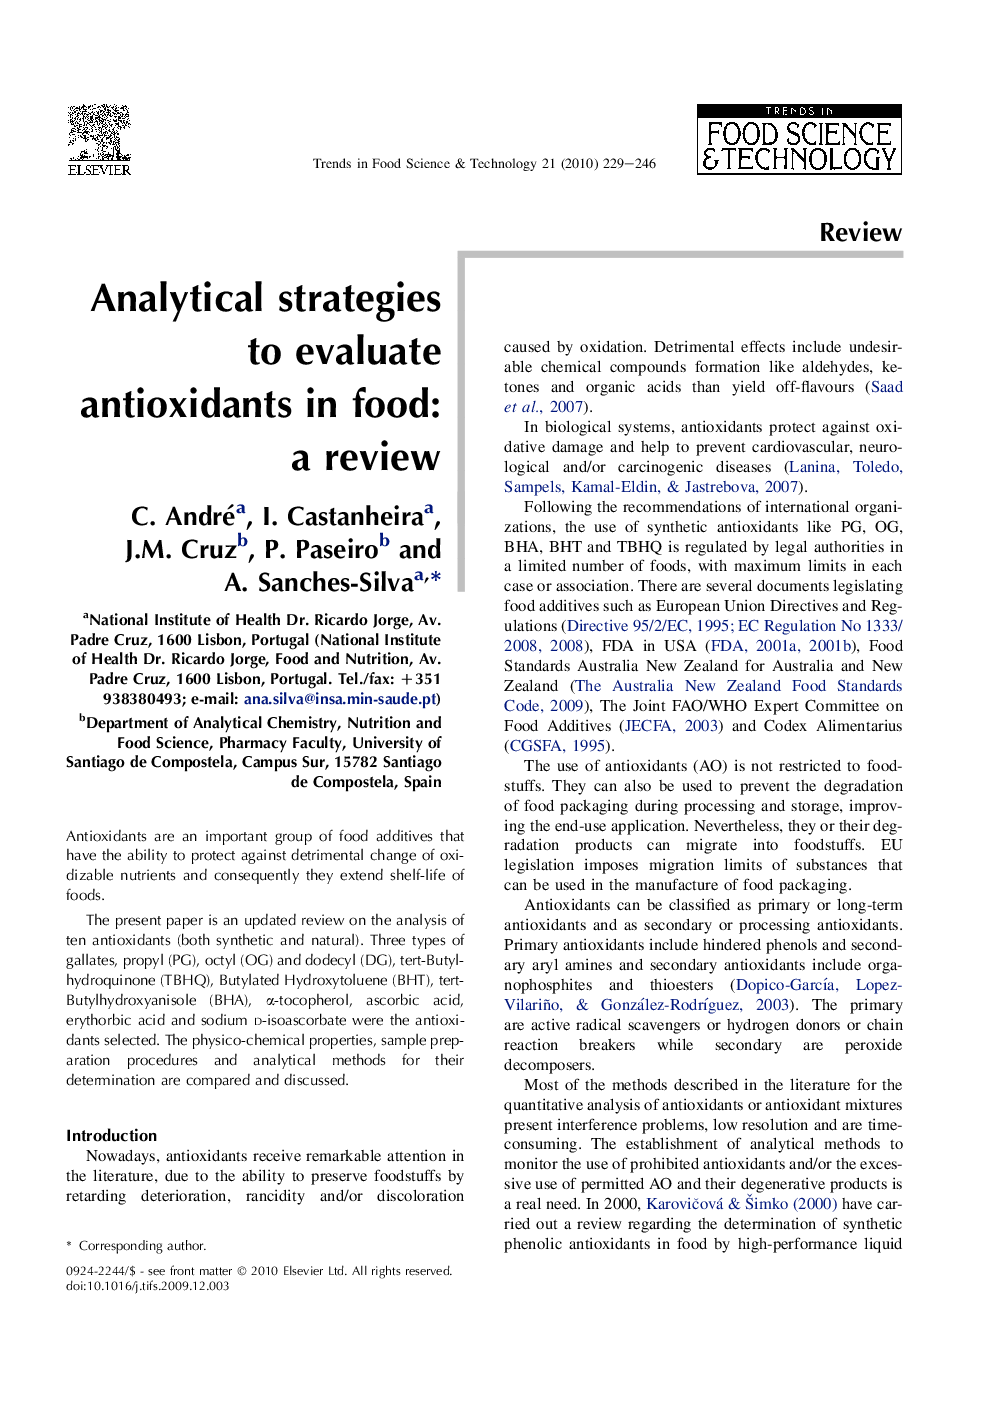 Analytical strategies to evaluate antioxidants in food: a review